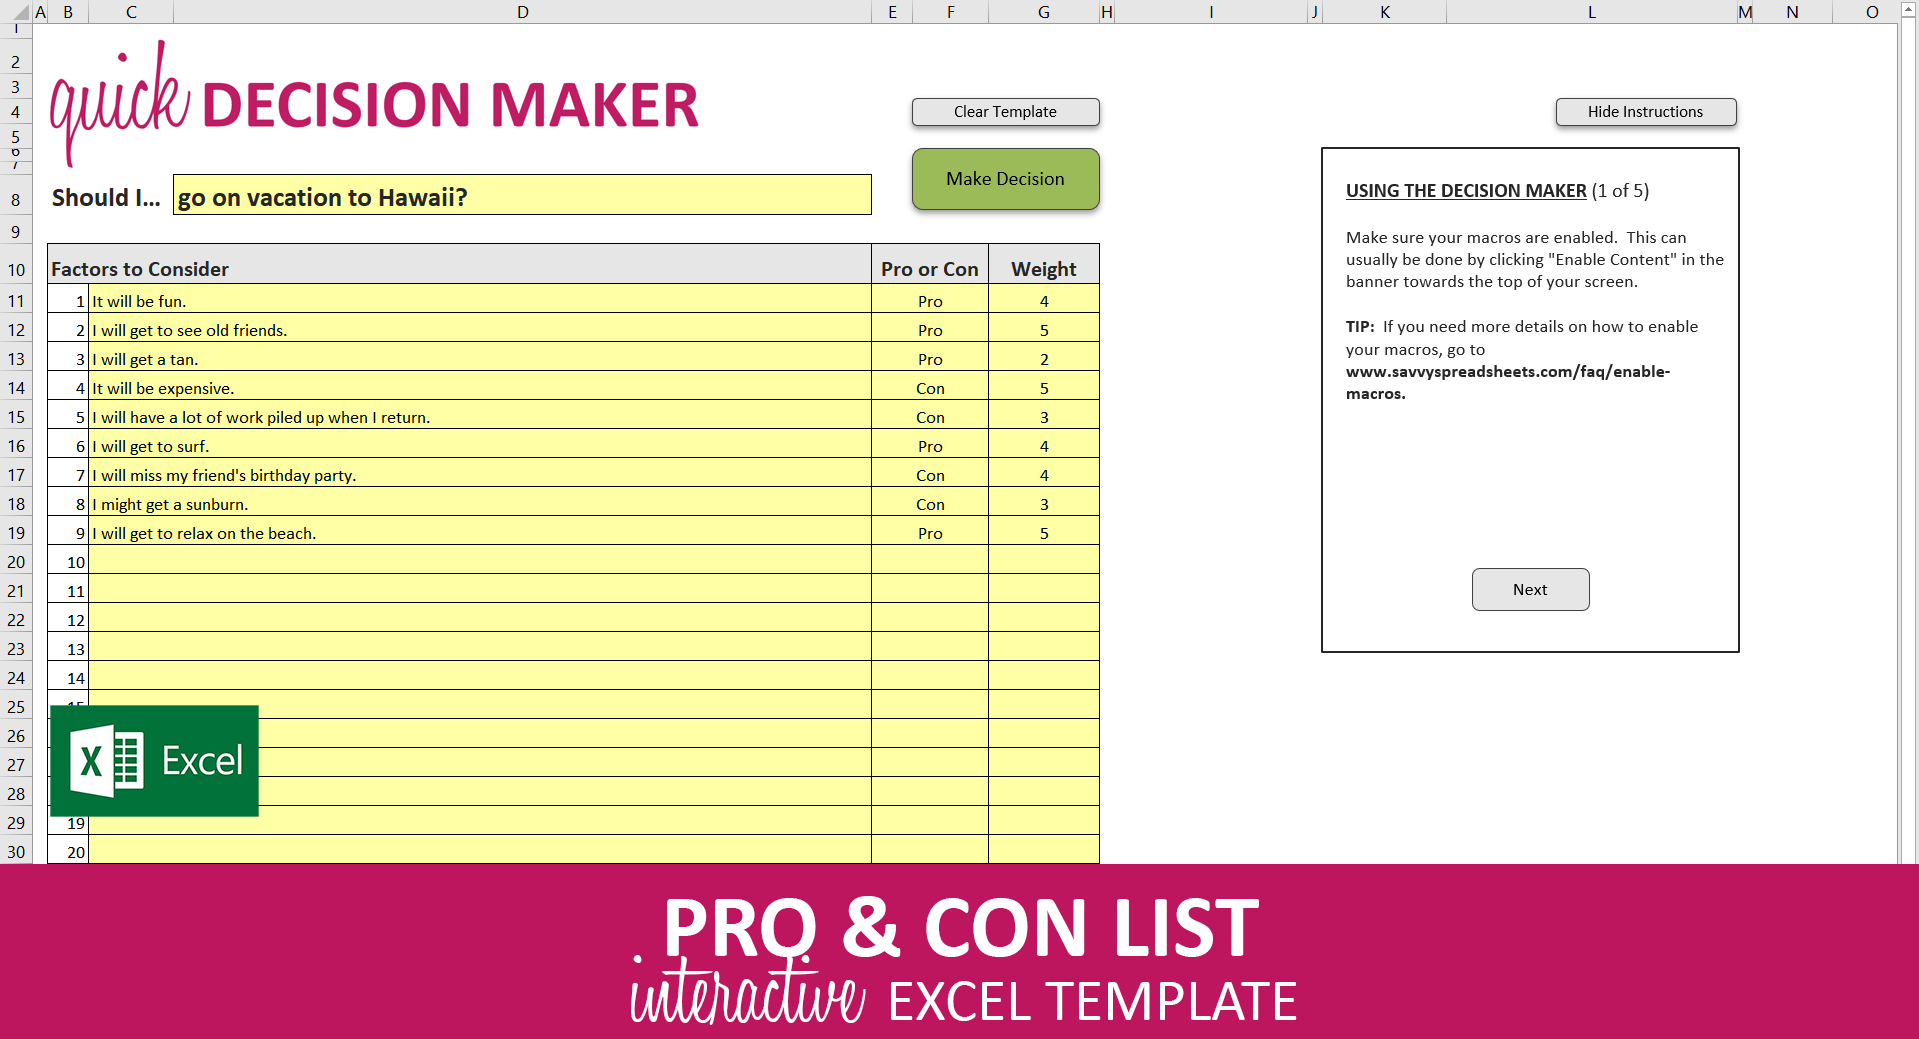 pros-and-cons-template-excel-should-you-use-excel-or-google-sheets